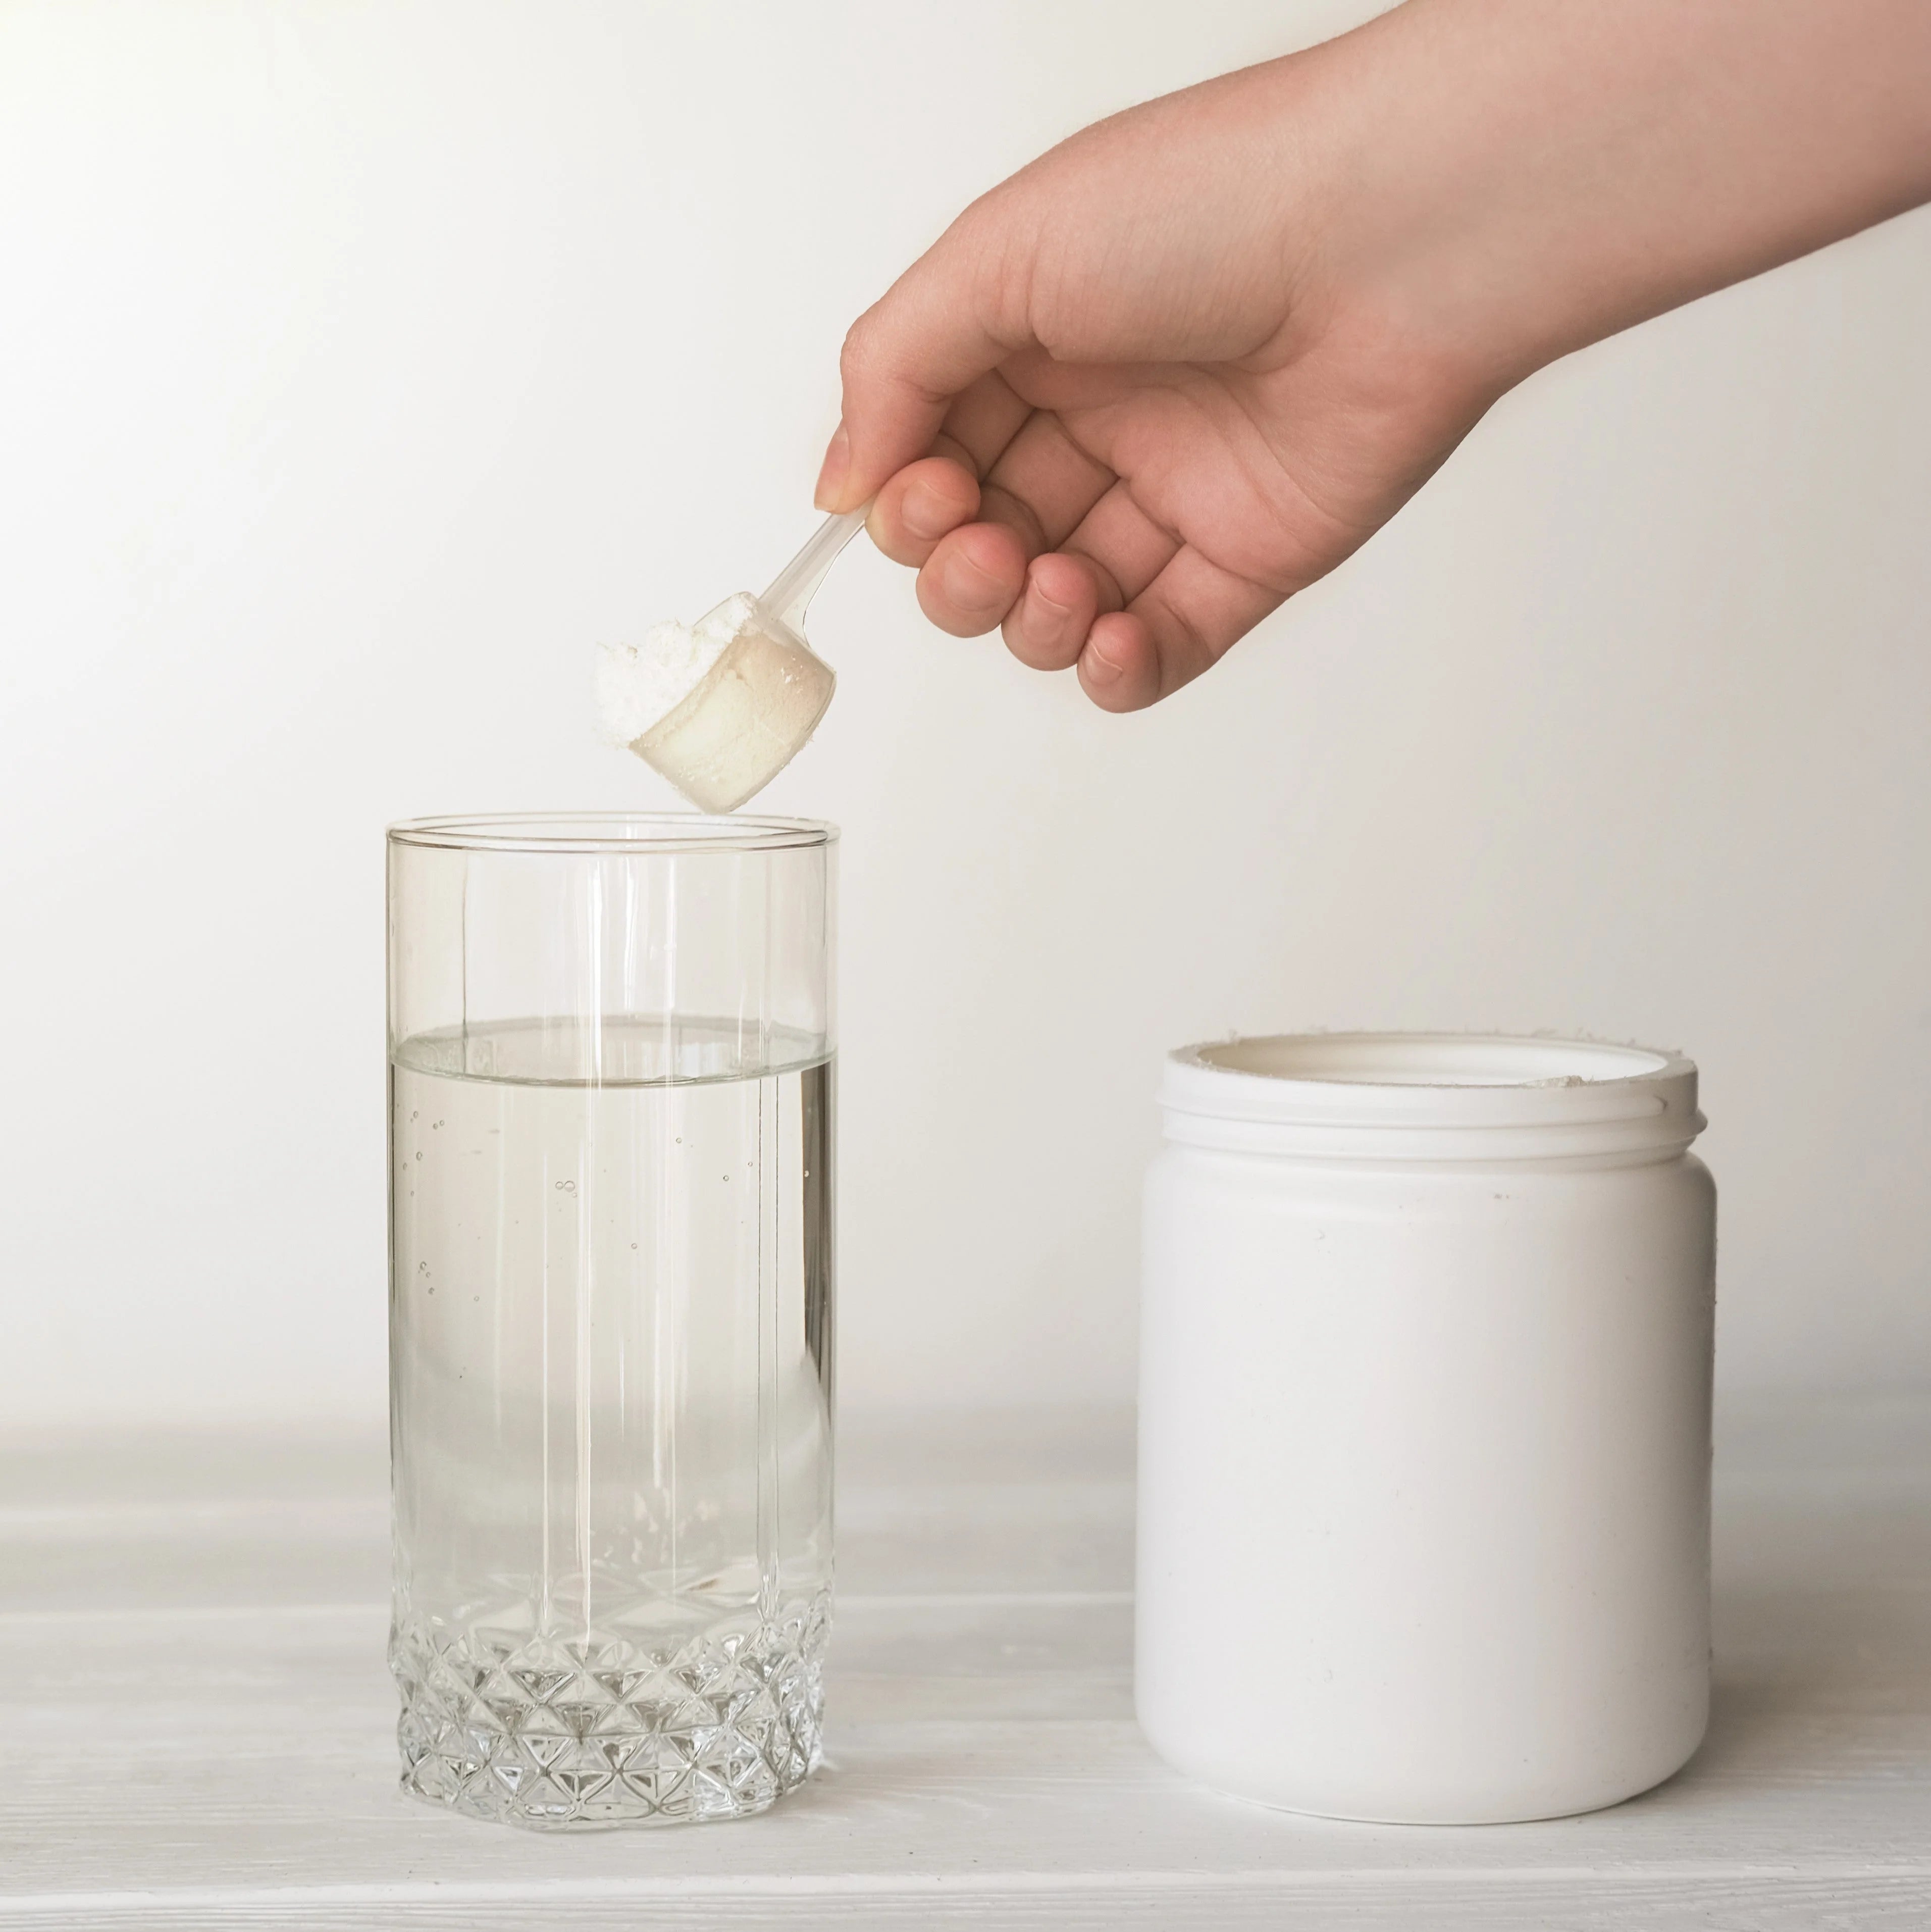 5 Beneficial Water Supplements That Will Help Your Skin Health